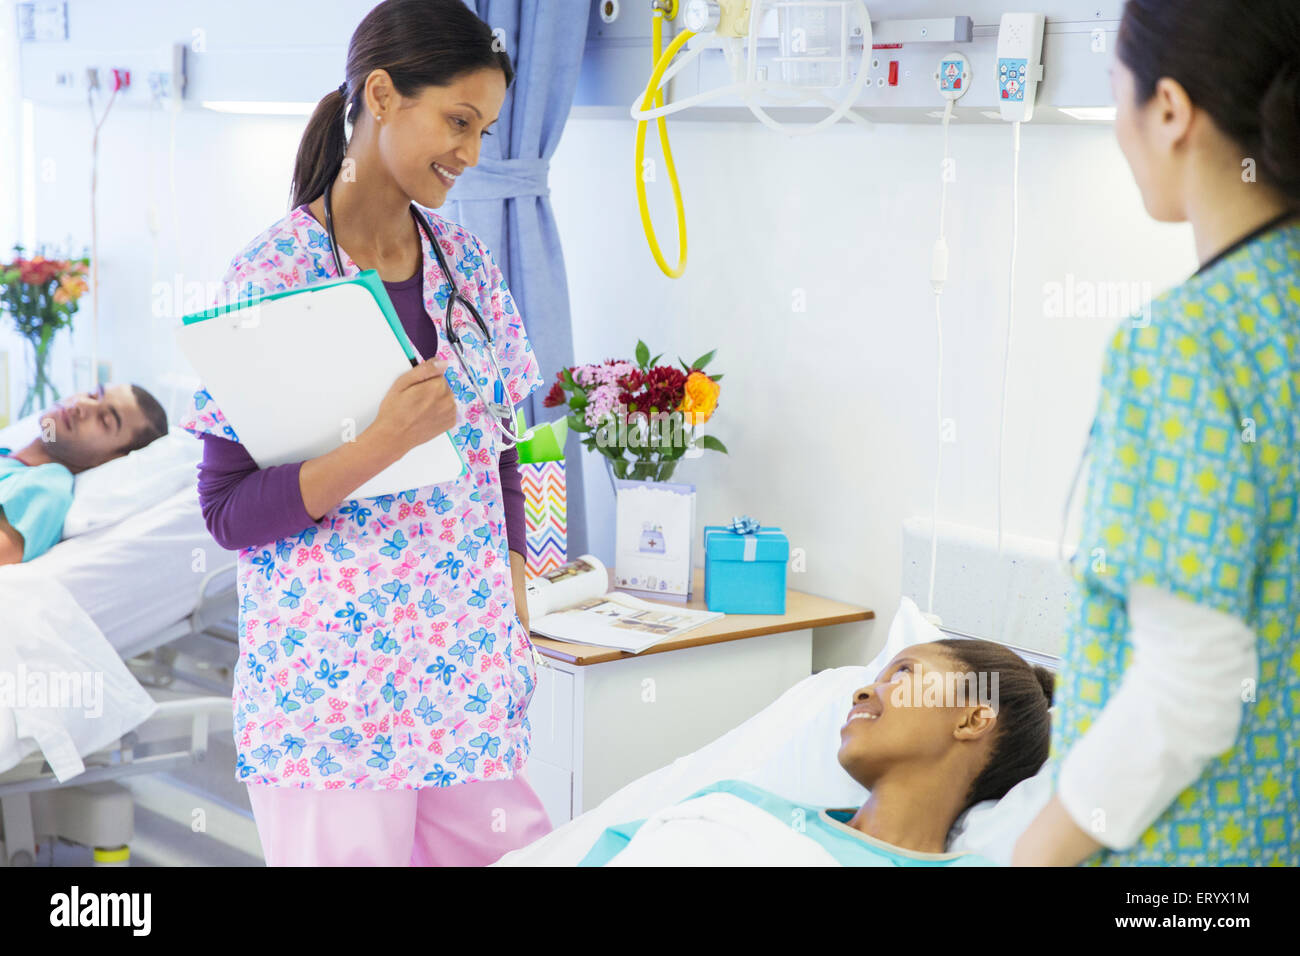 Smiling nurses talking with patient in hospital room Stock Photo